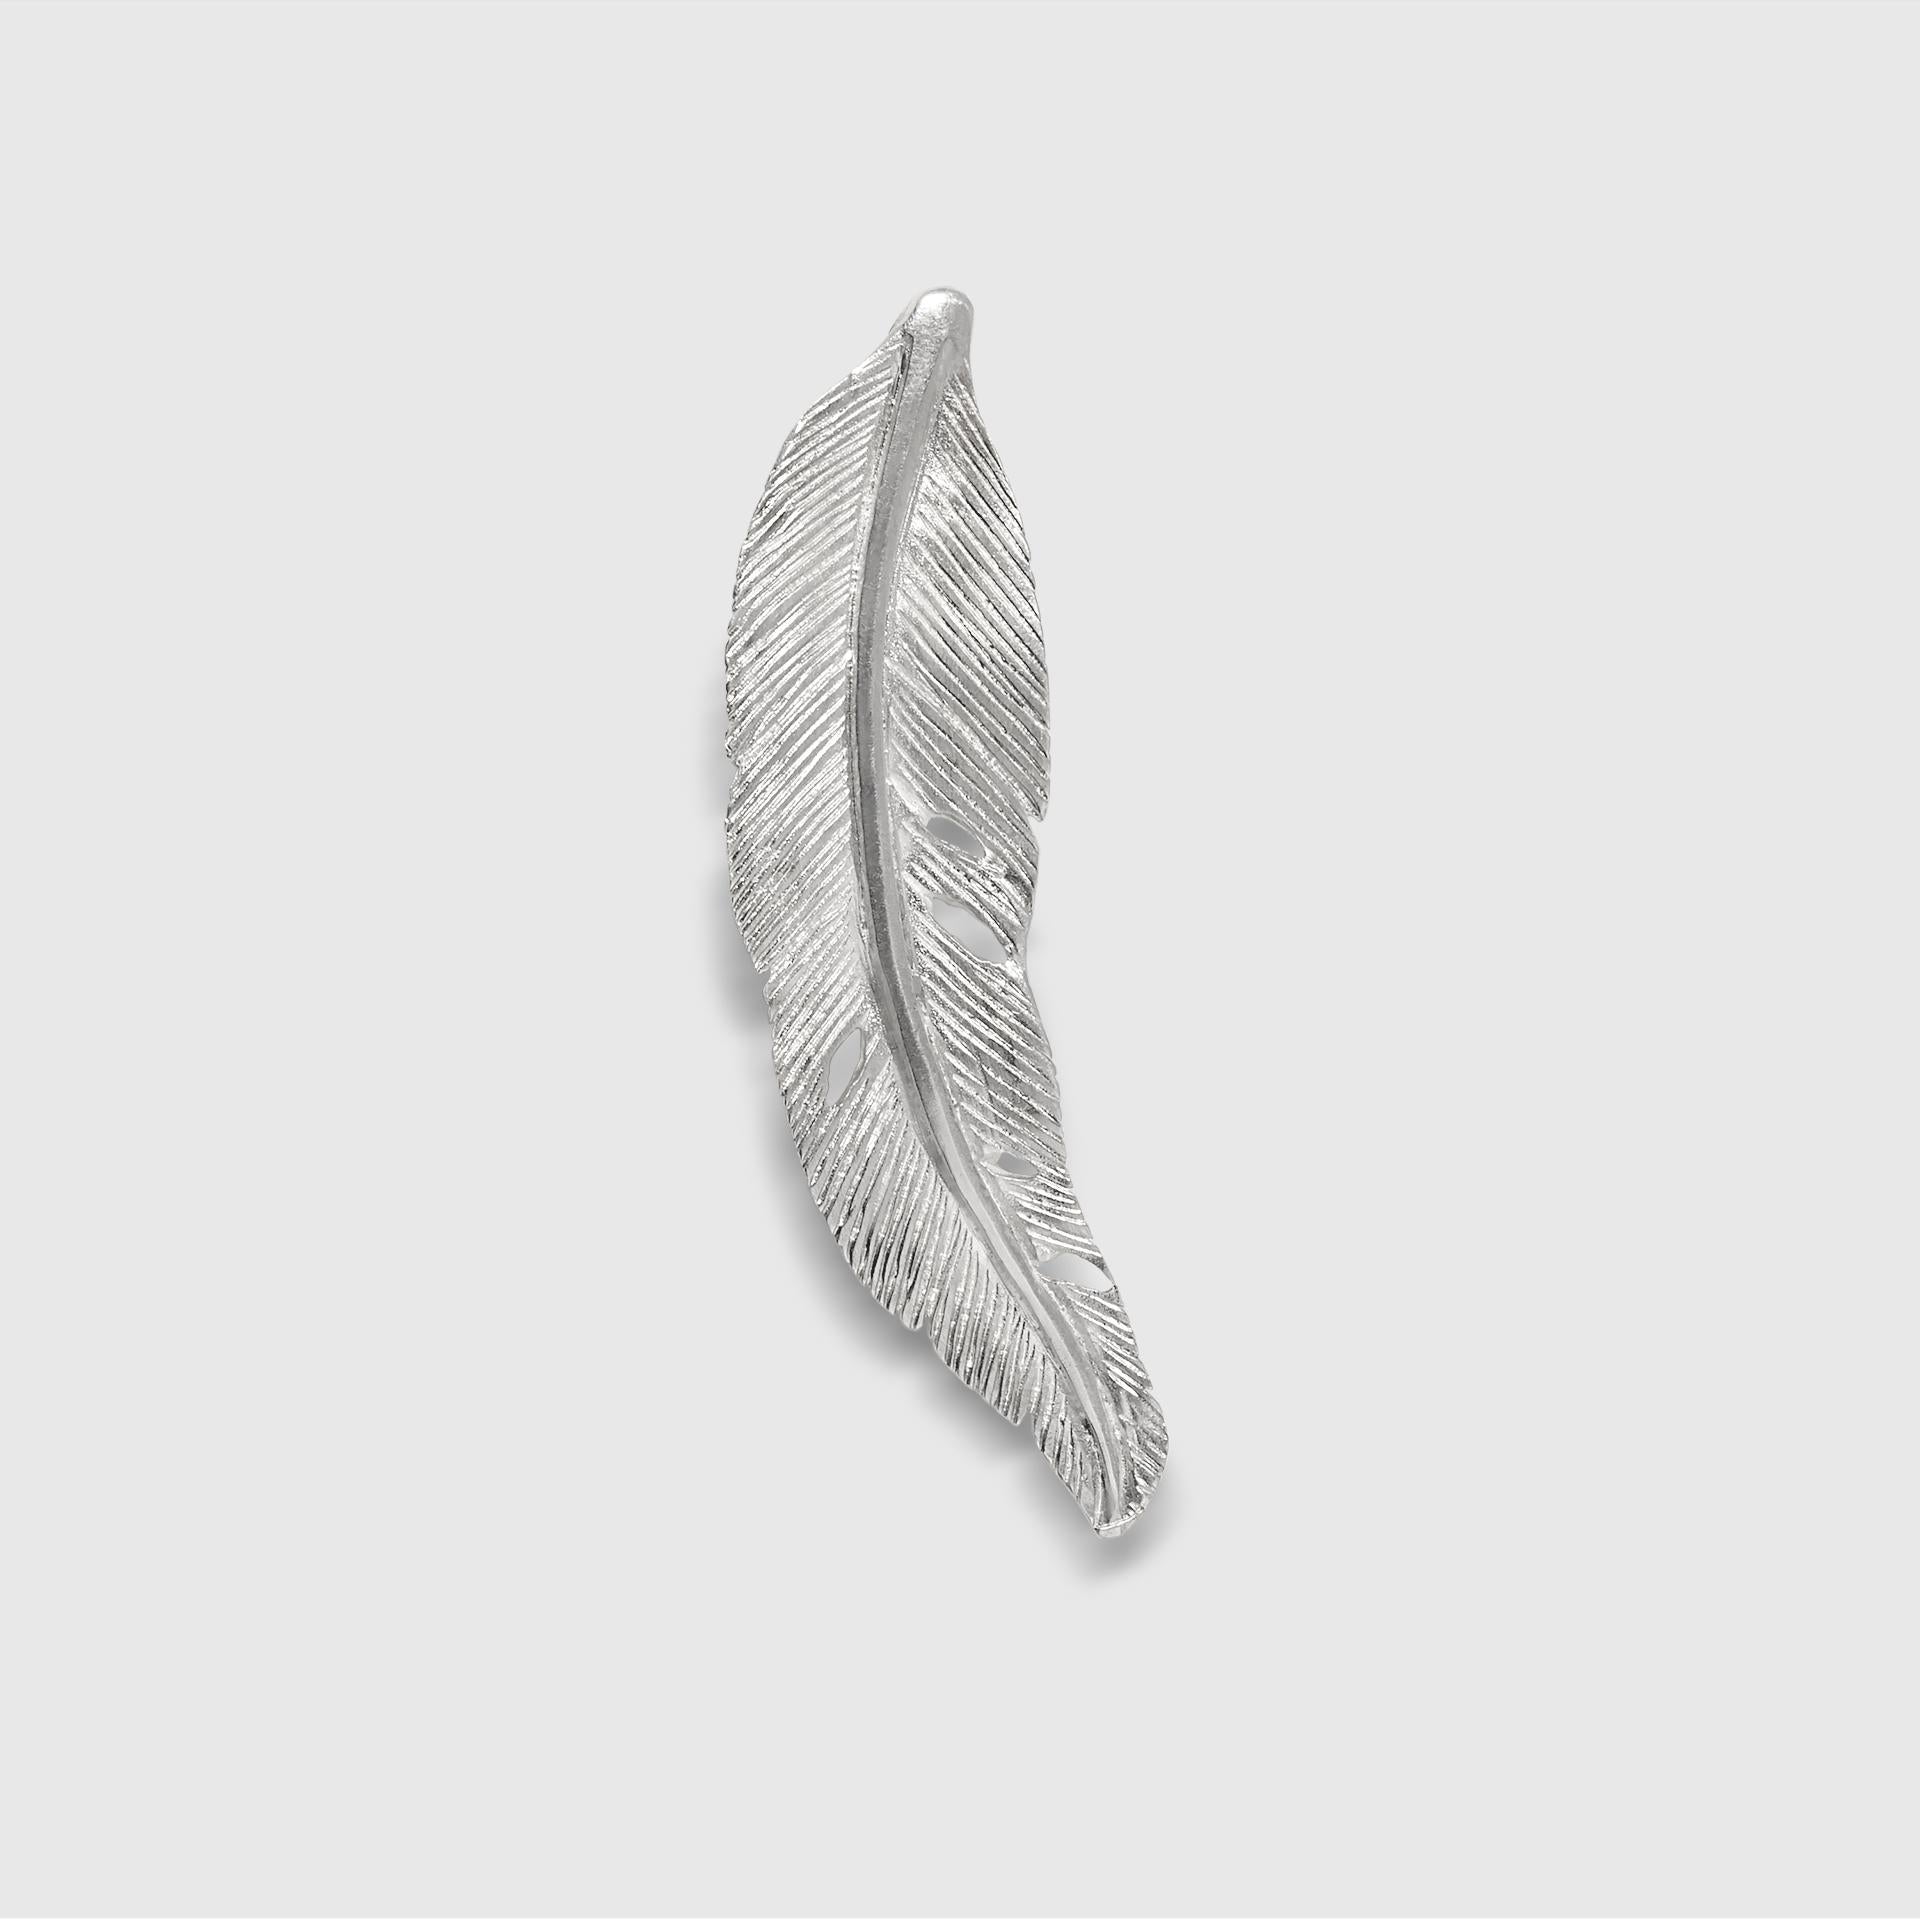 Small, Sterling Silver Detailed Bird Feather Brooch Pin by Ashley Childs

This feather was originally carved by 